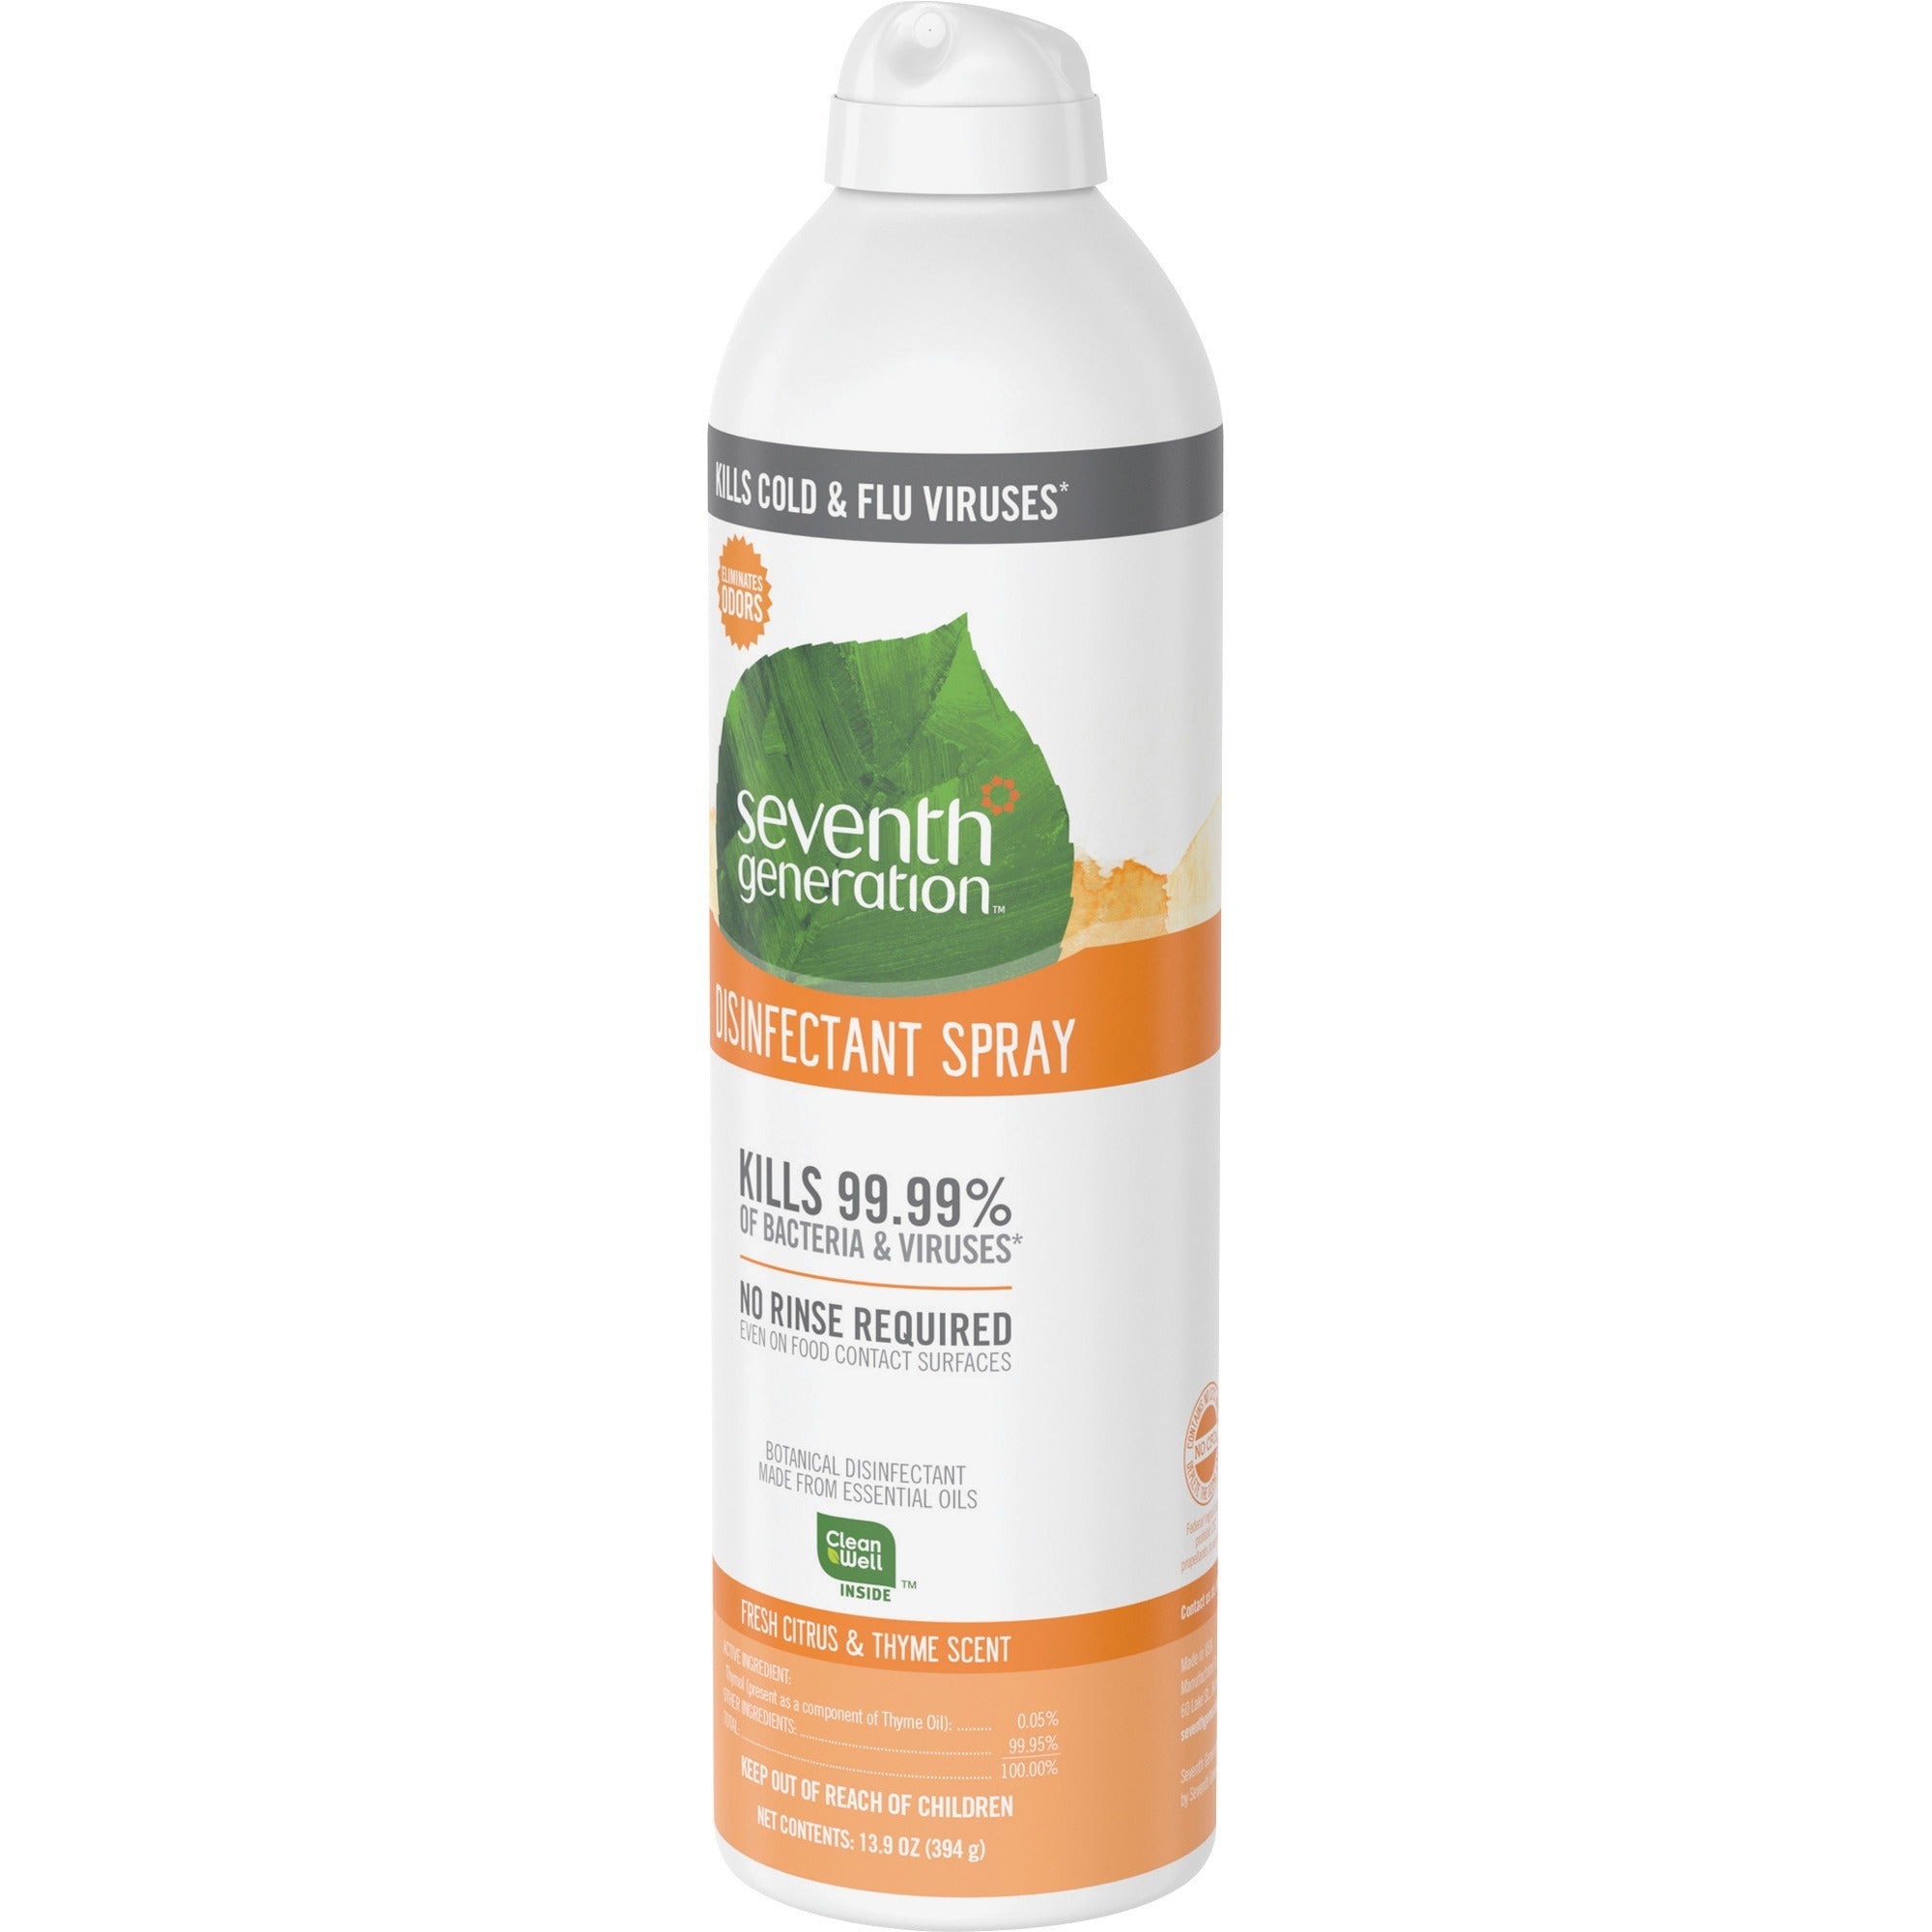 seventh-generation-disinfectant-cleaner-for-day-care-139-fl-oz-04-quart-fresh-citrus-&-thyme-scent-8-carton-non-flammable-rinse-free-antibacterial-disinfectant-clear_sev22980ct - 2